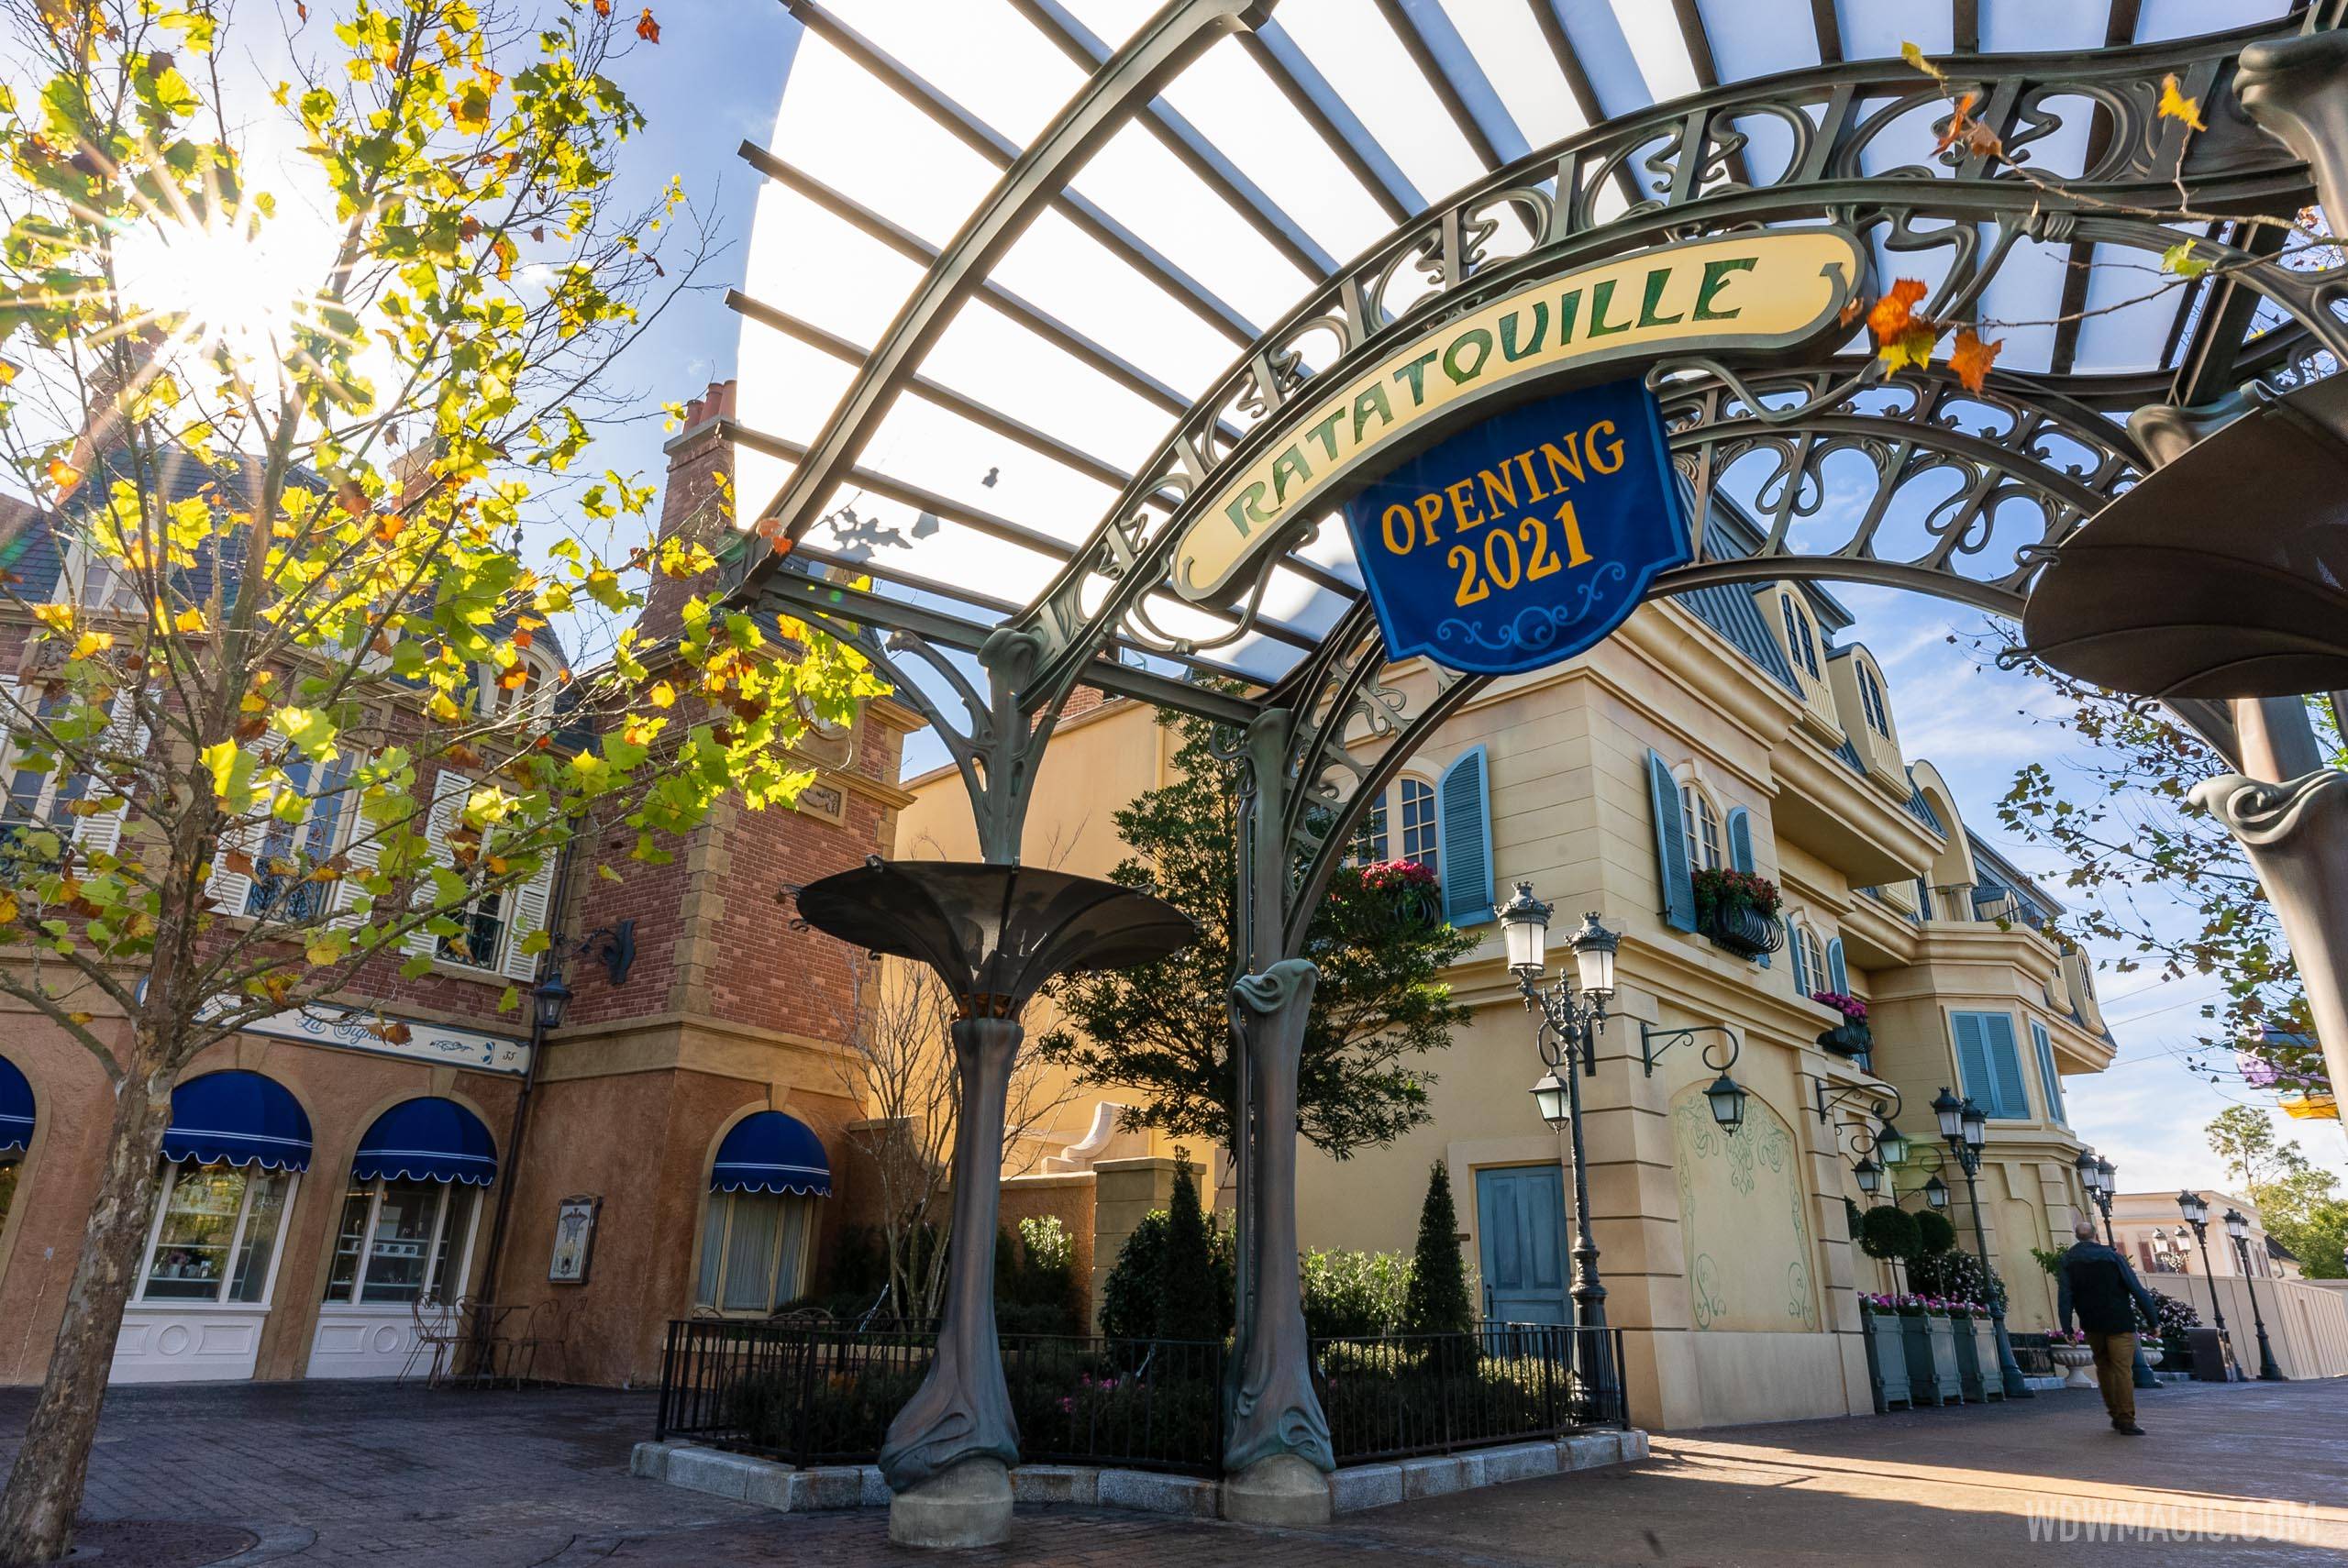 Remy's Ratatouille Adventure will open October 1 2021 at EPCOT